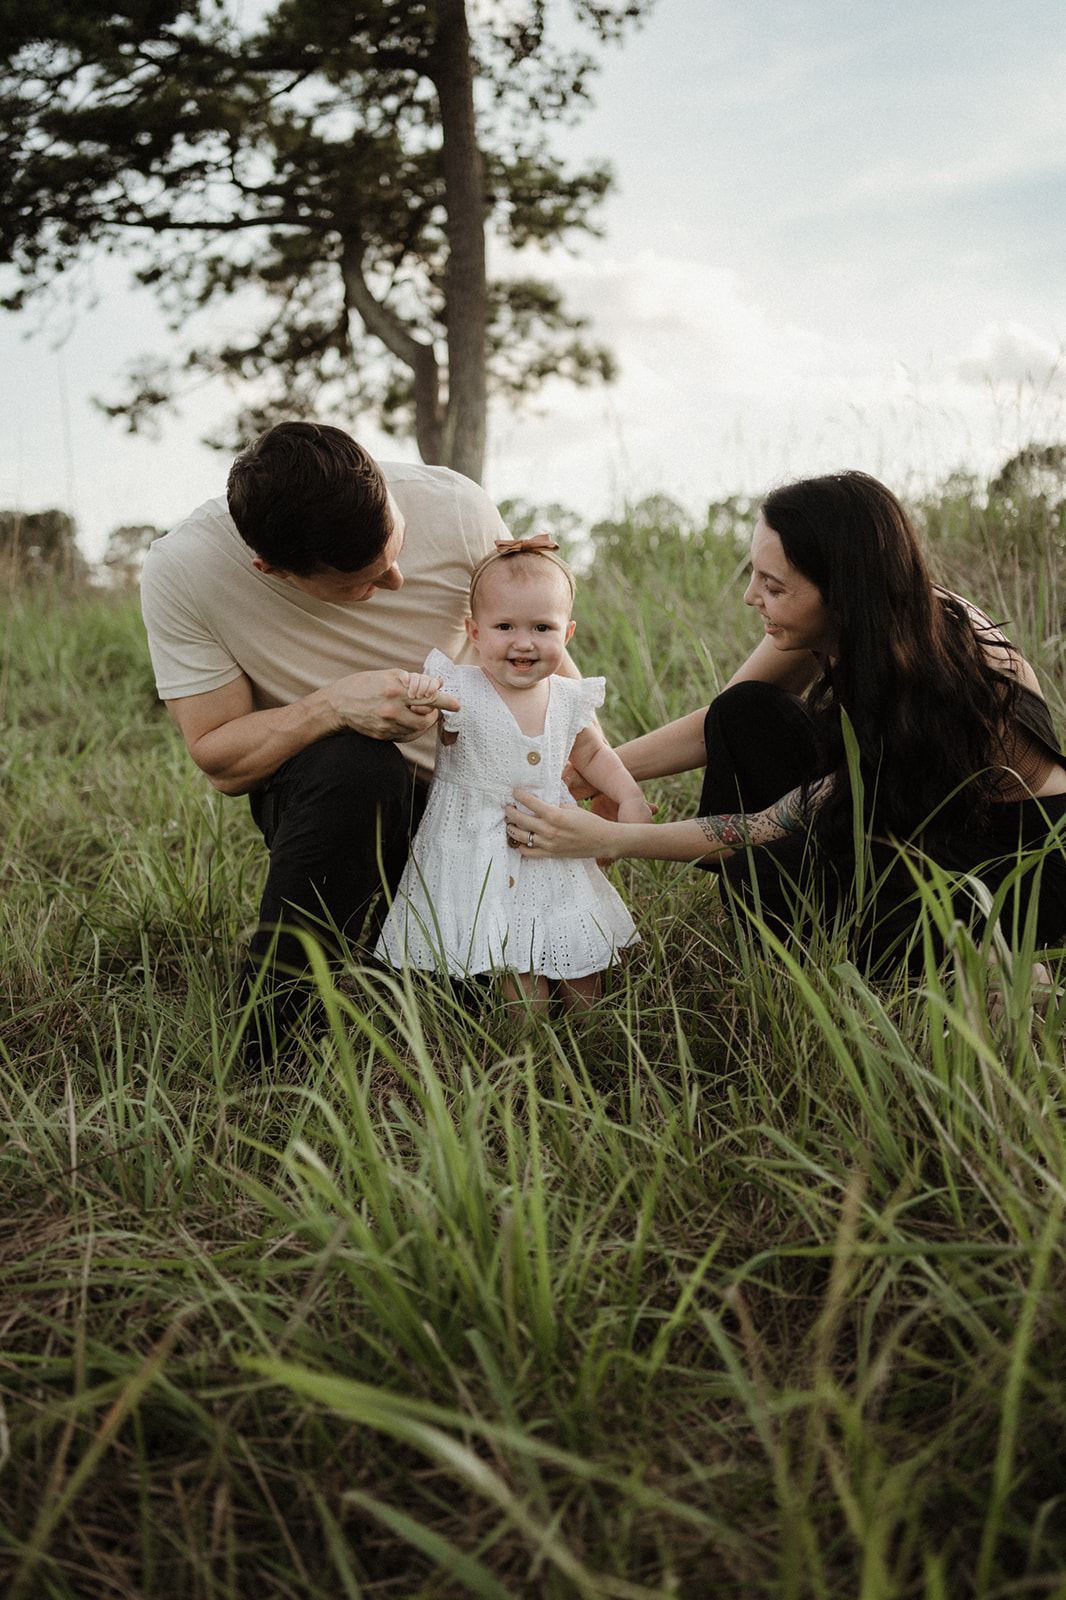 A mother tickles her toddler daughter in a white dress while dad helps her walk through a grassy field Pattywhacks